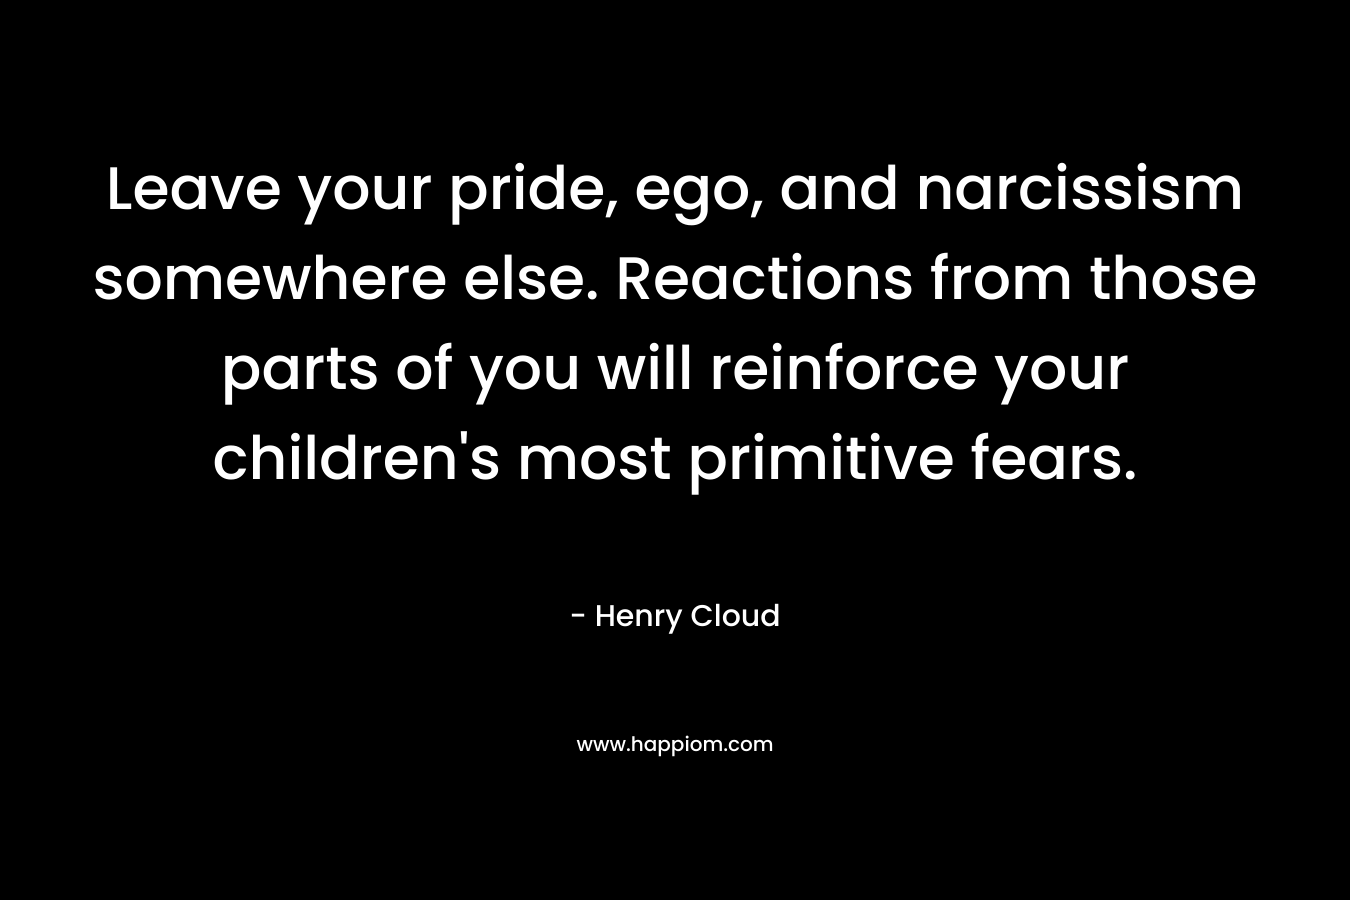 Leave your pride, ego, and narcissism somewhere else. Reactions from those parts of you will reinforce your children's most primitive fears.